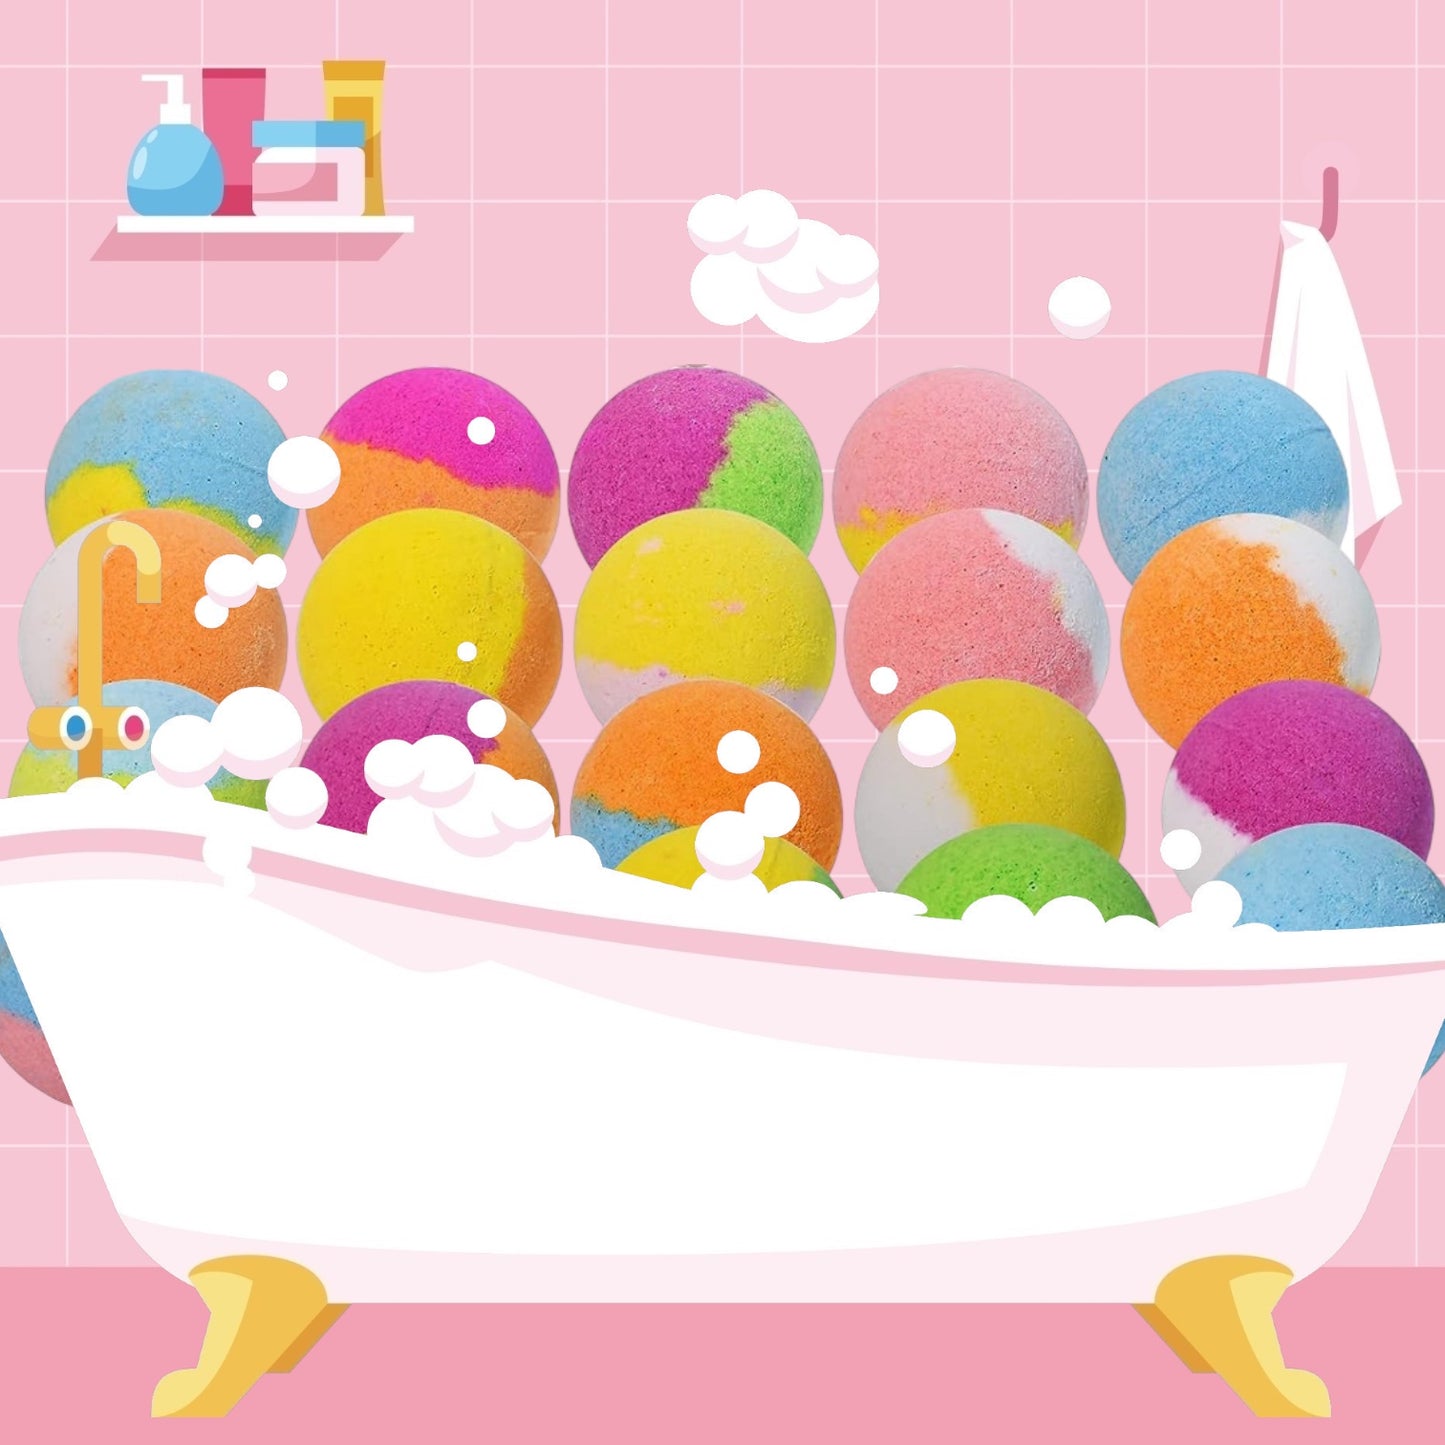 Kids Just Wanna Have Fun Bath Bombs With Surprise!